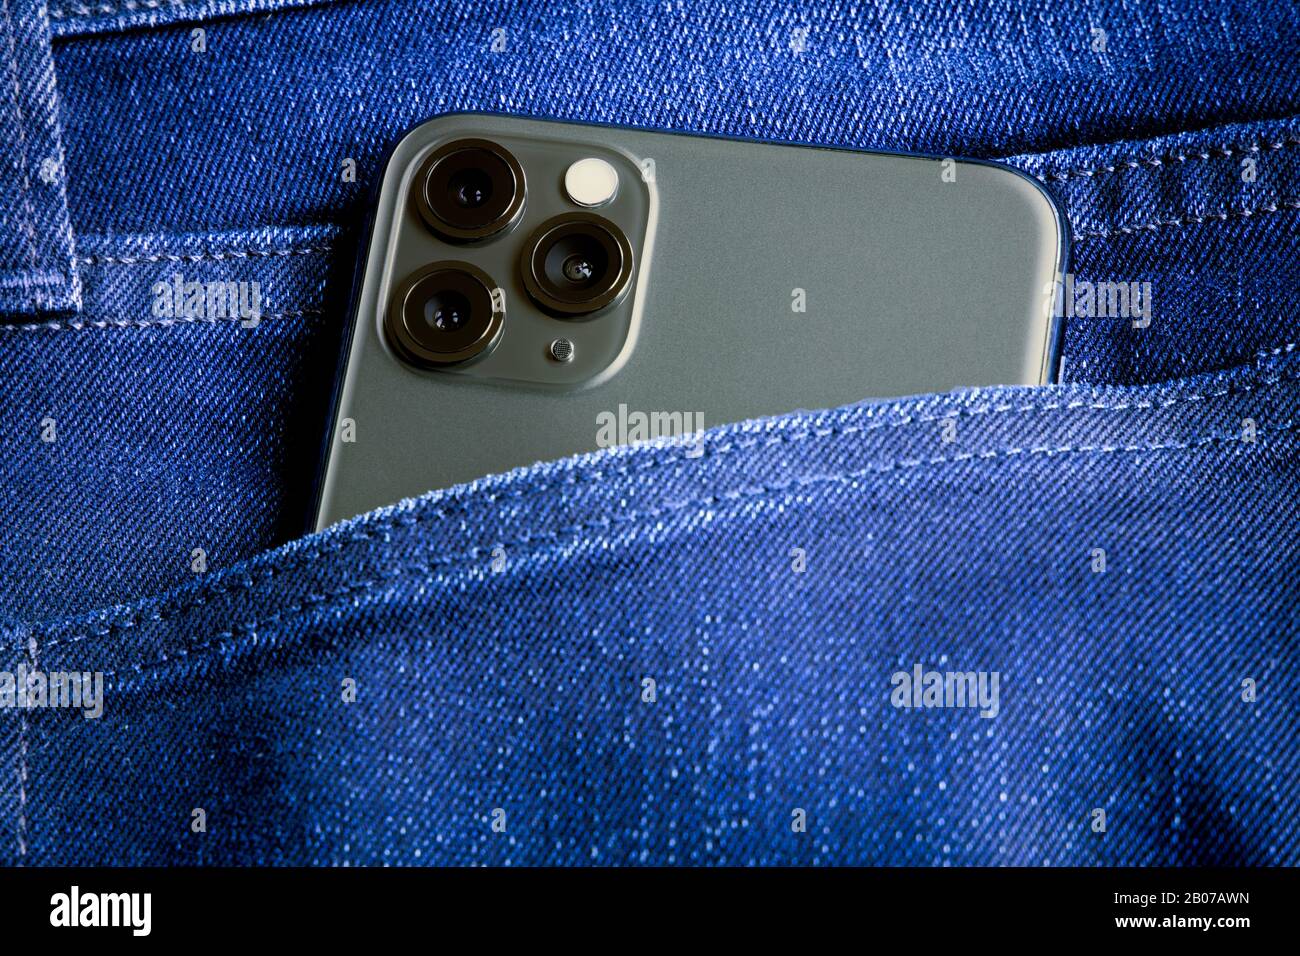 New Space Gray Apple iPhone 11 Pro MAX smartphone in jeans pocket close-up detail view the triple lens camera. Stock Photo